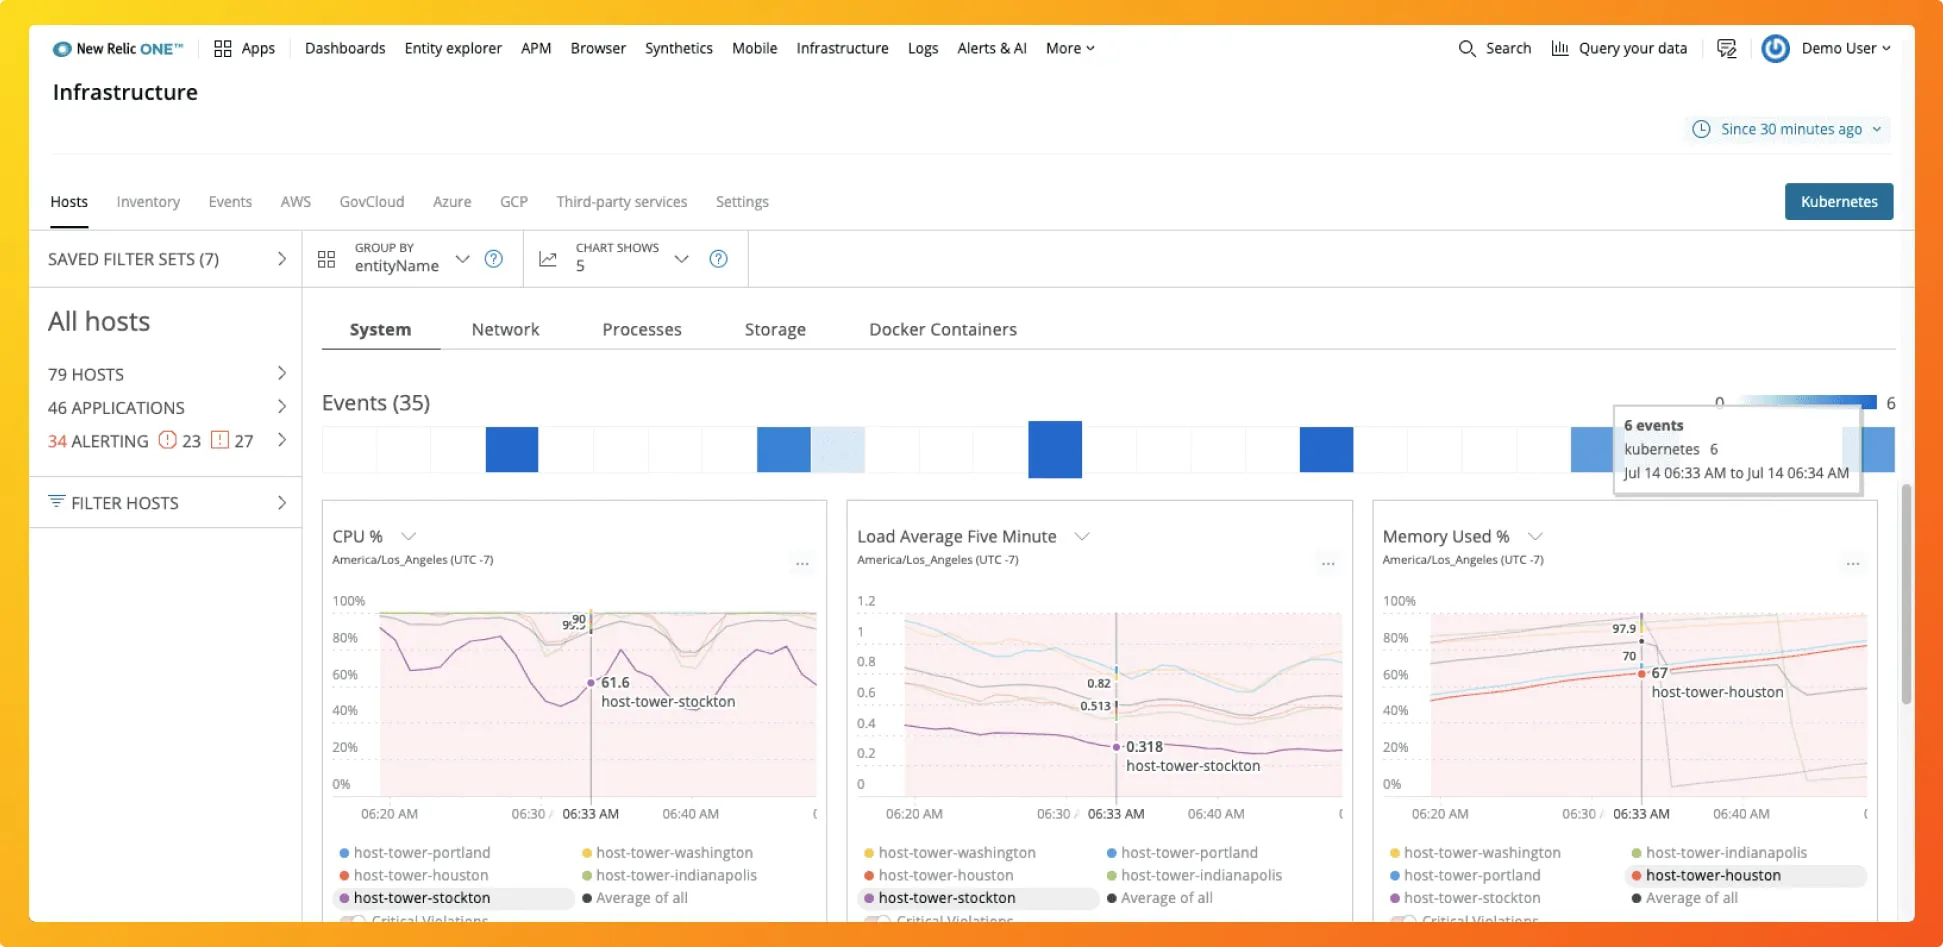 New Relic Infrastructure Monitoring Dashboard